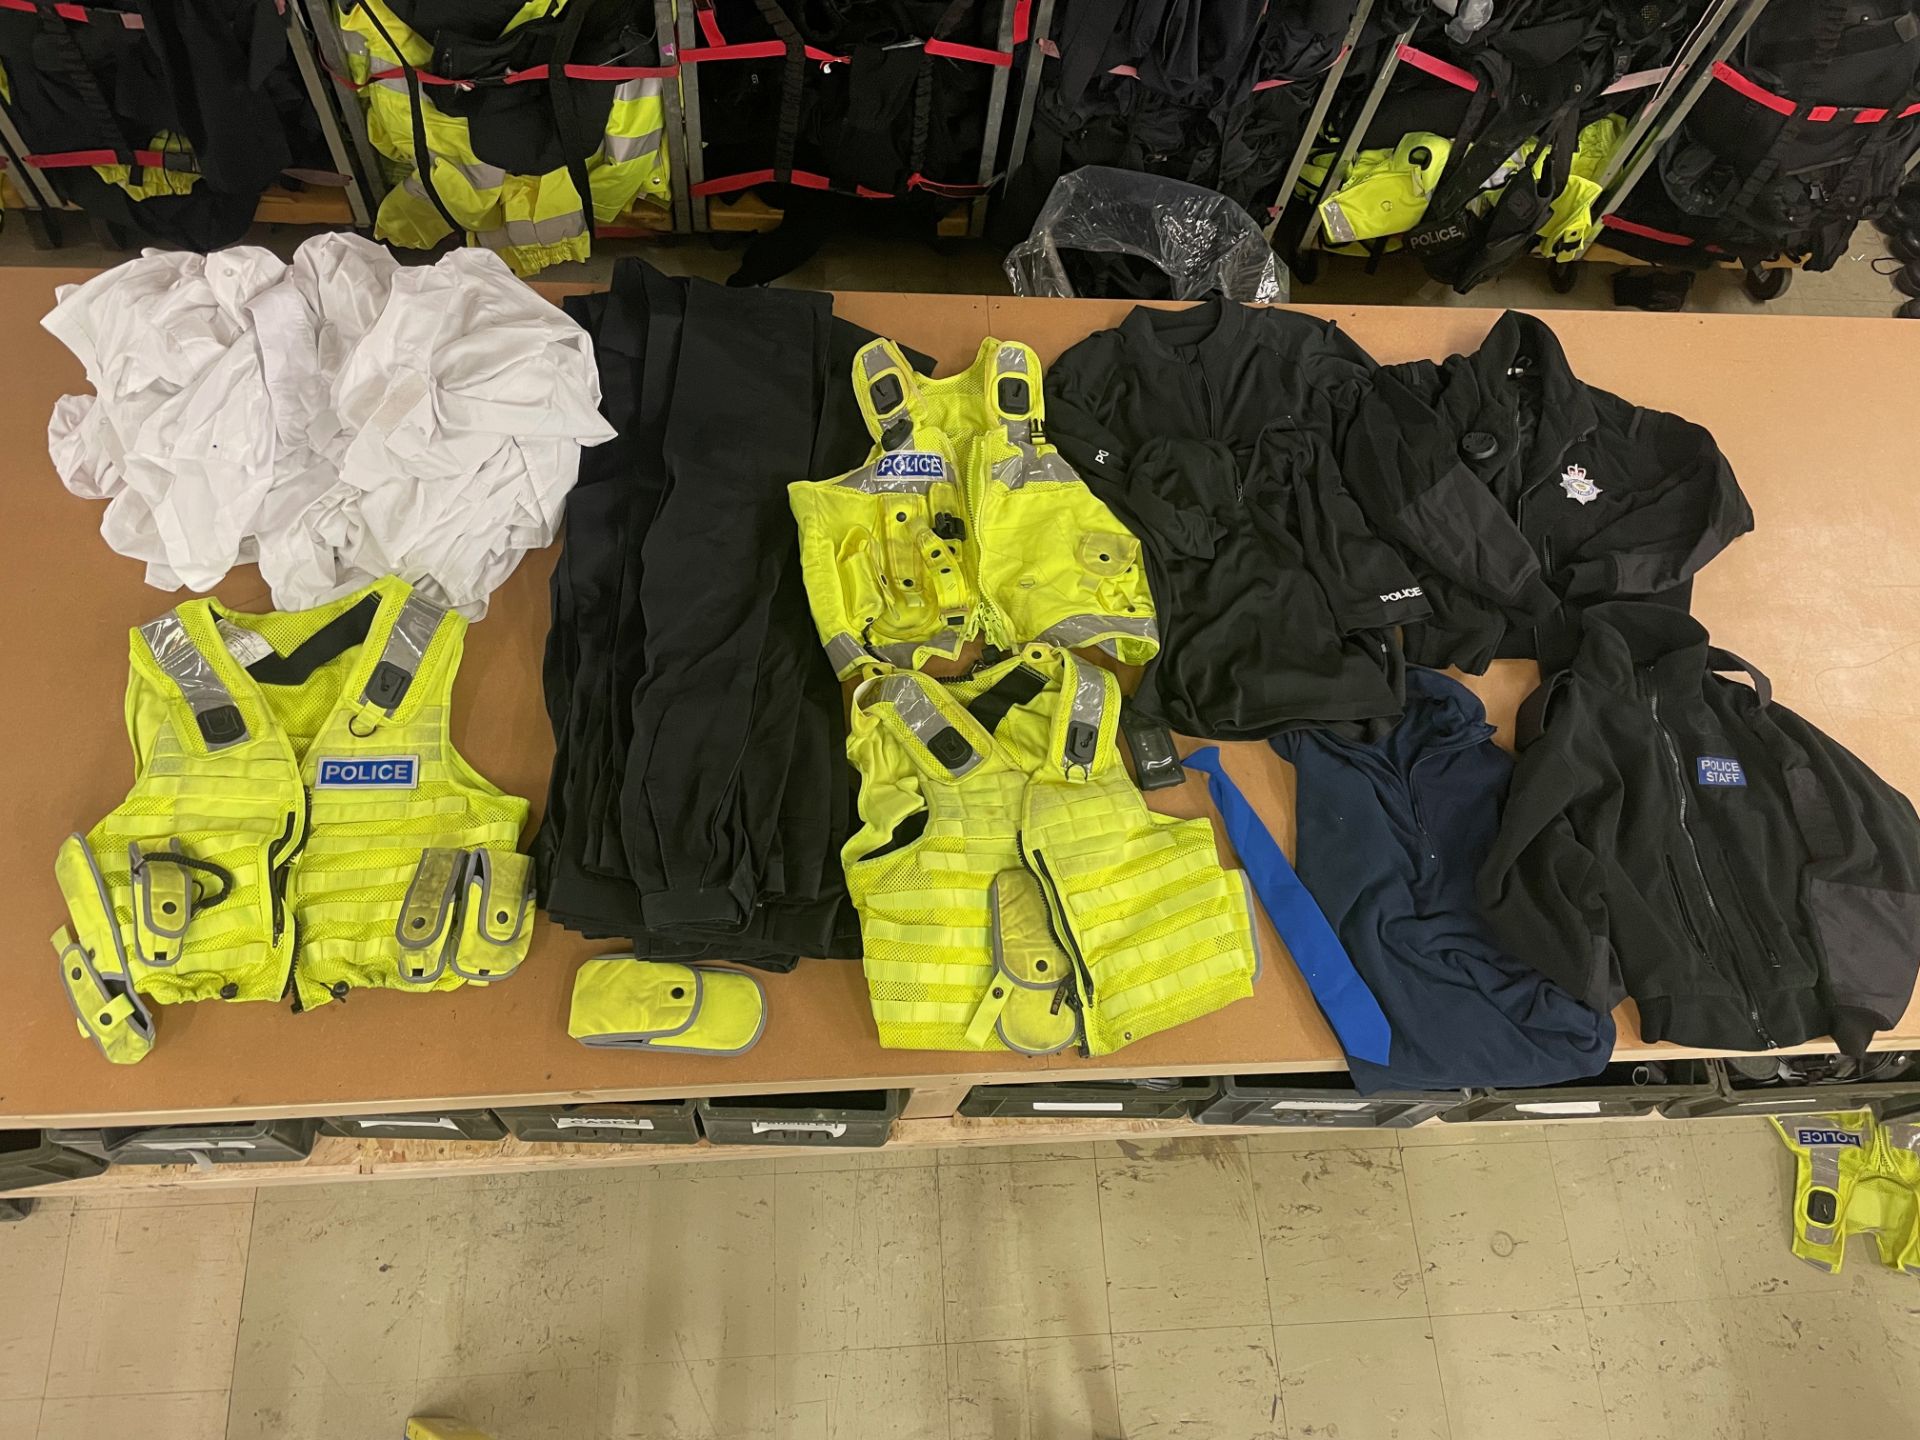 10 X BAGS OF EX POLICE CLOTHING - RRP £2750.00 - Image 4 of 12